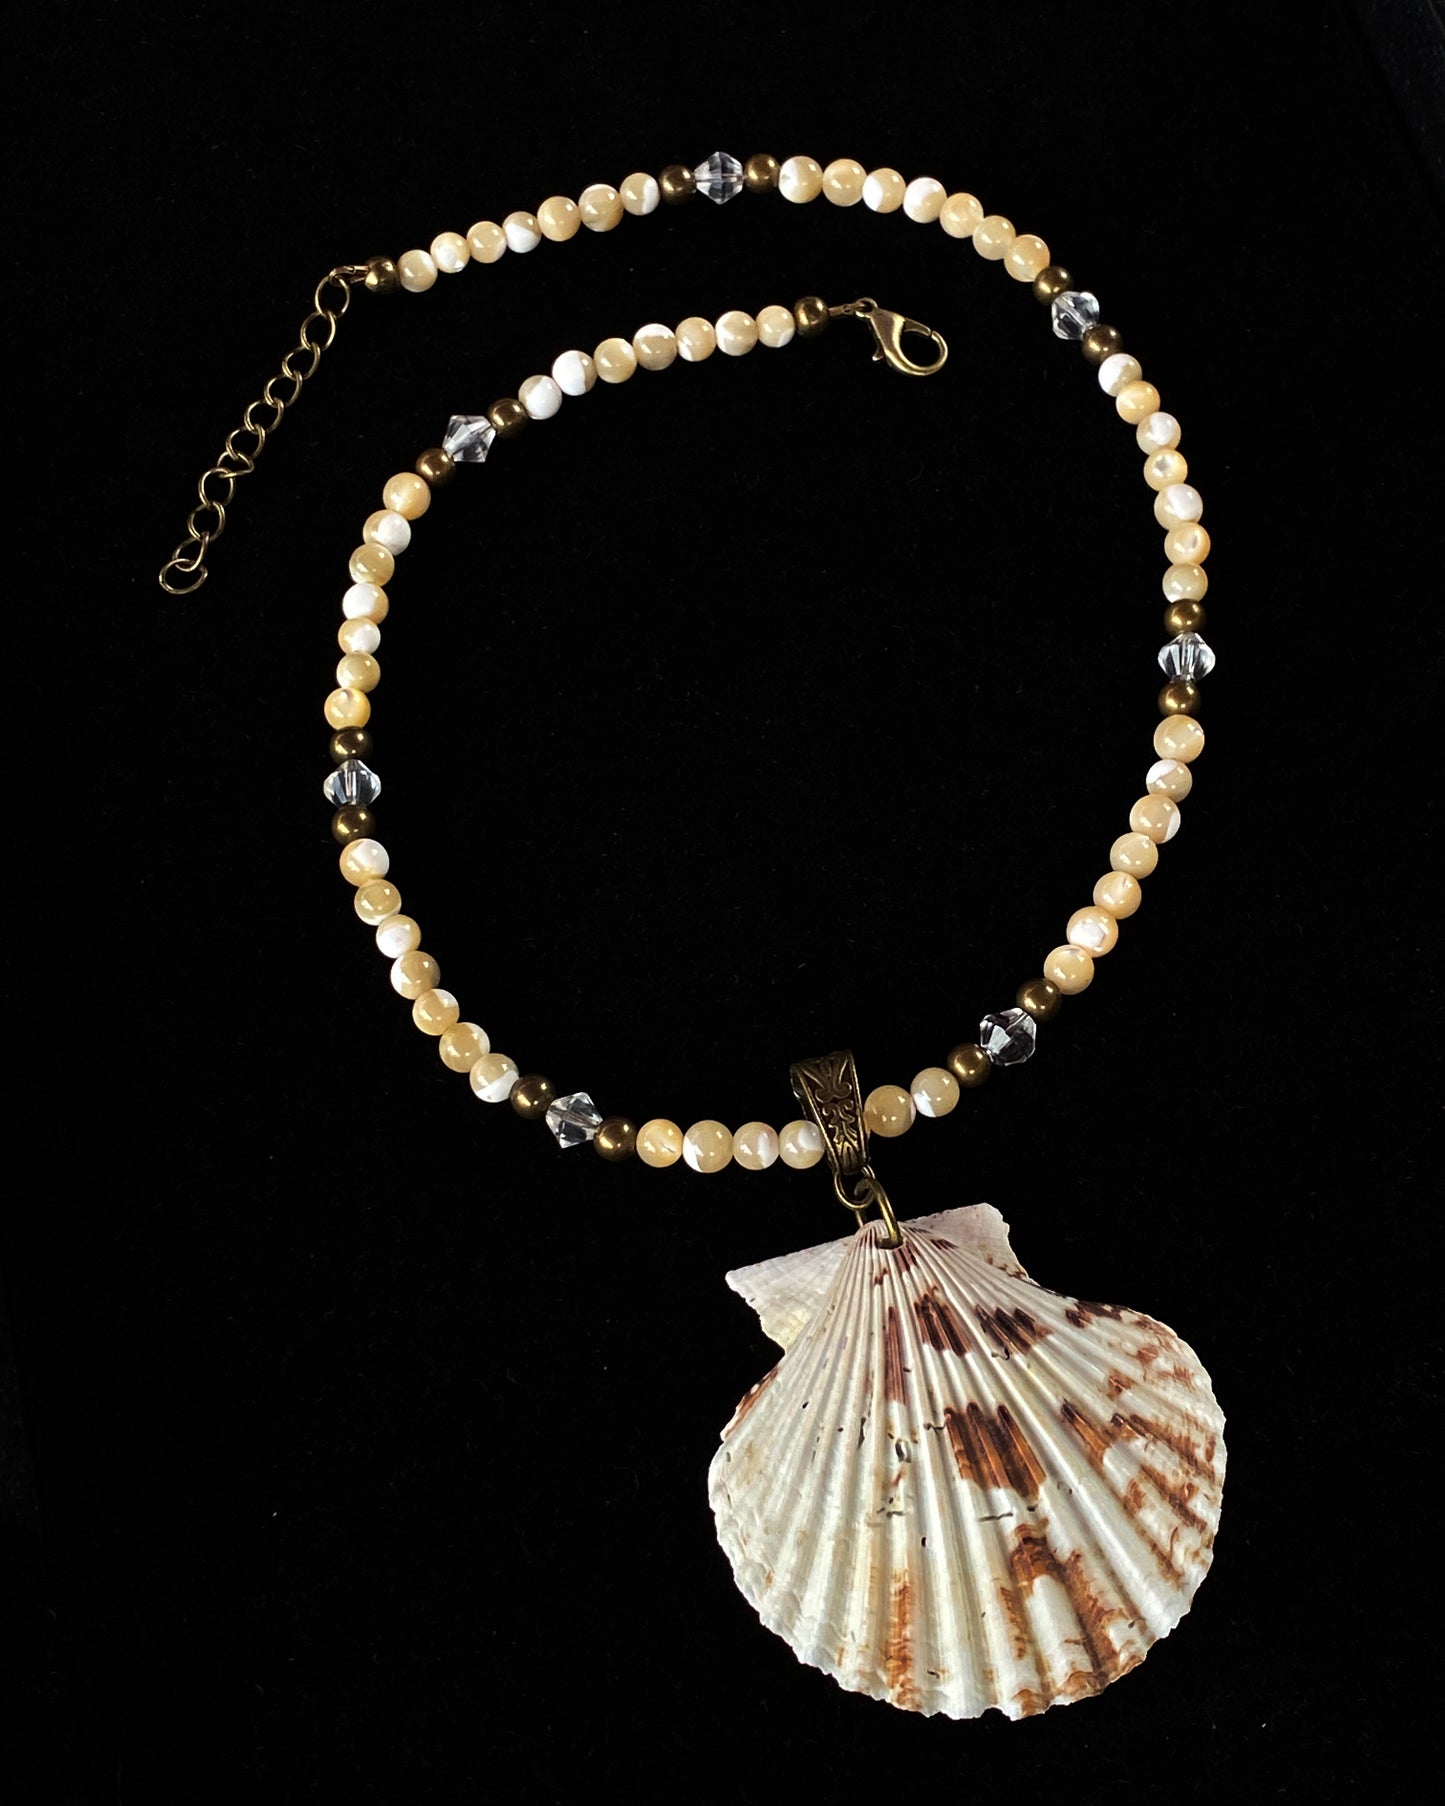 Beaded Mother of Pearl Necklace with Shell Pendant